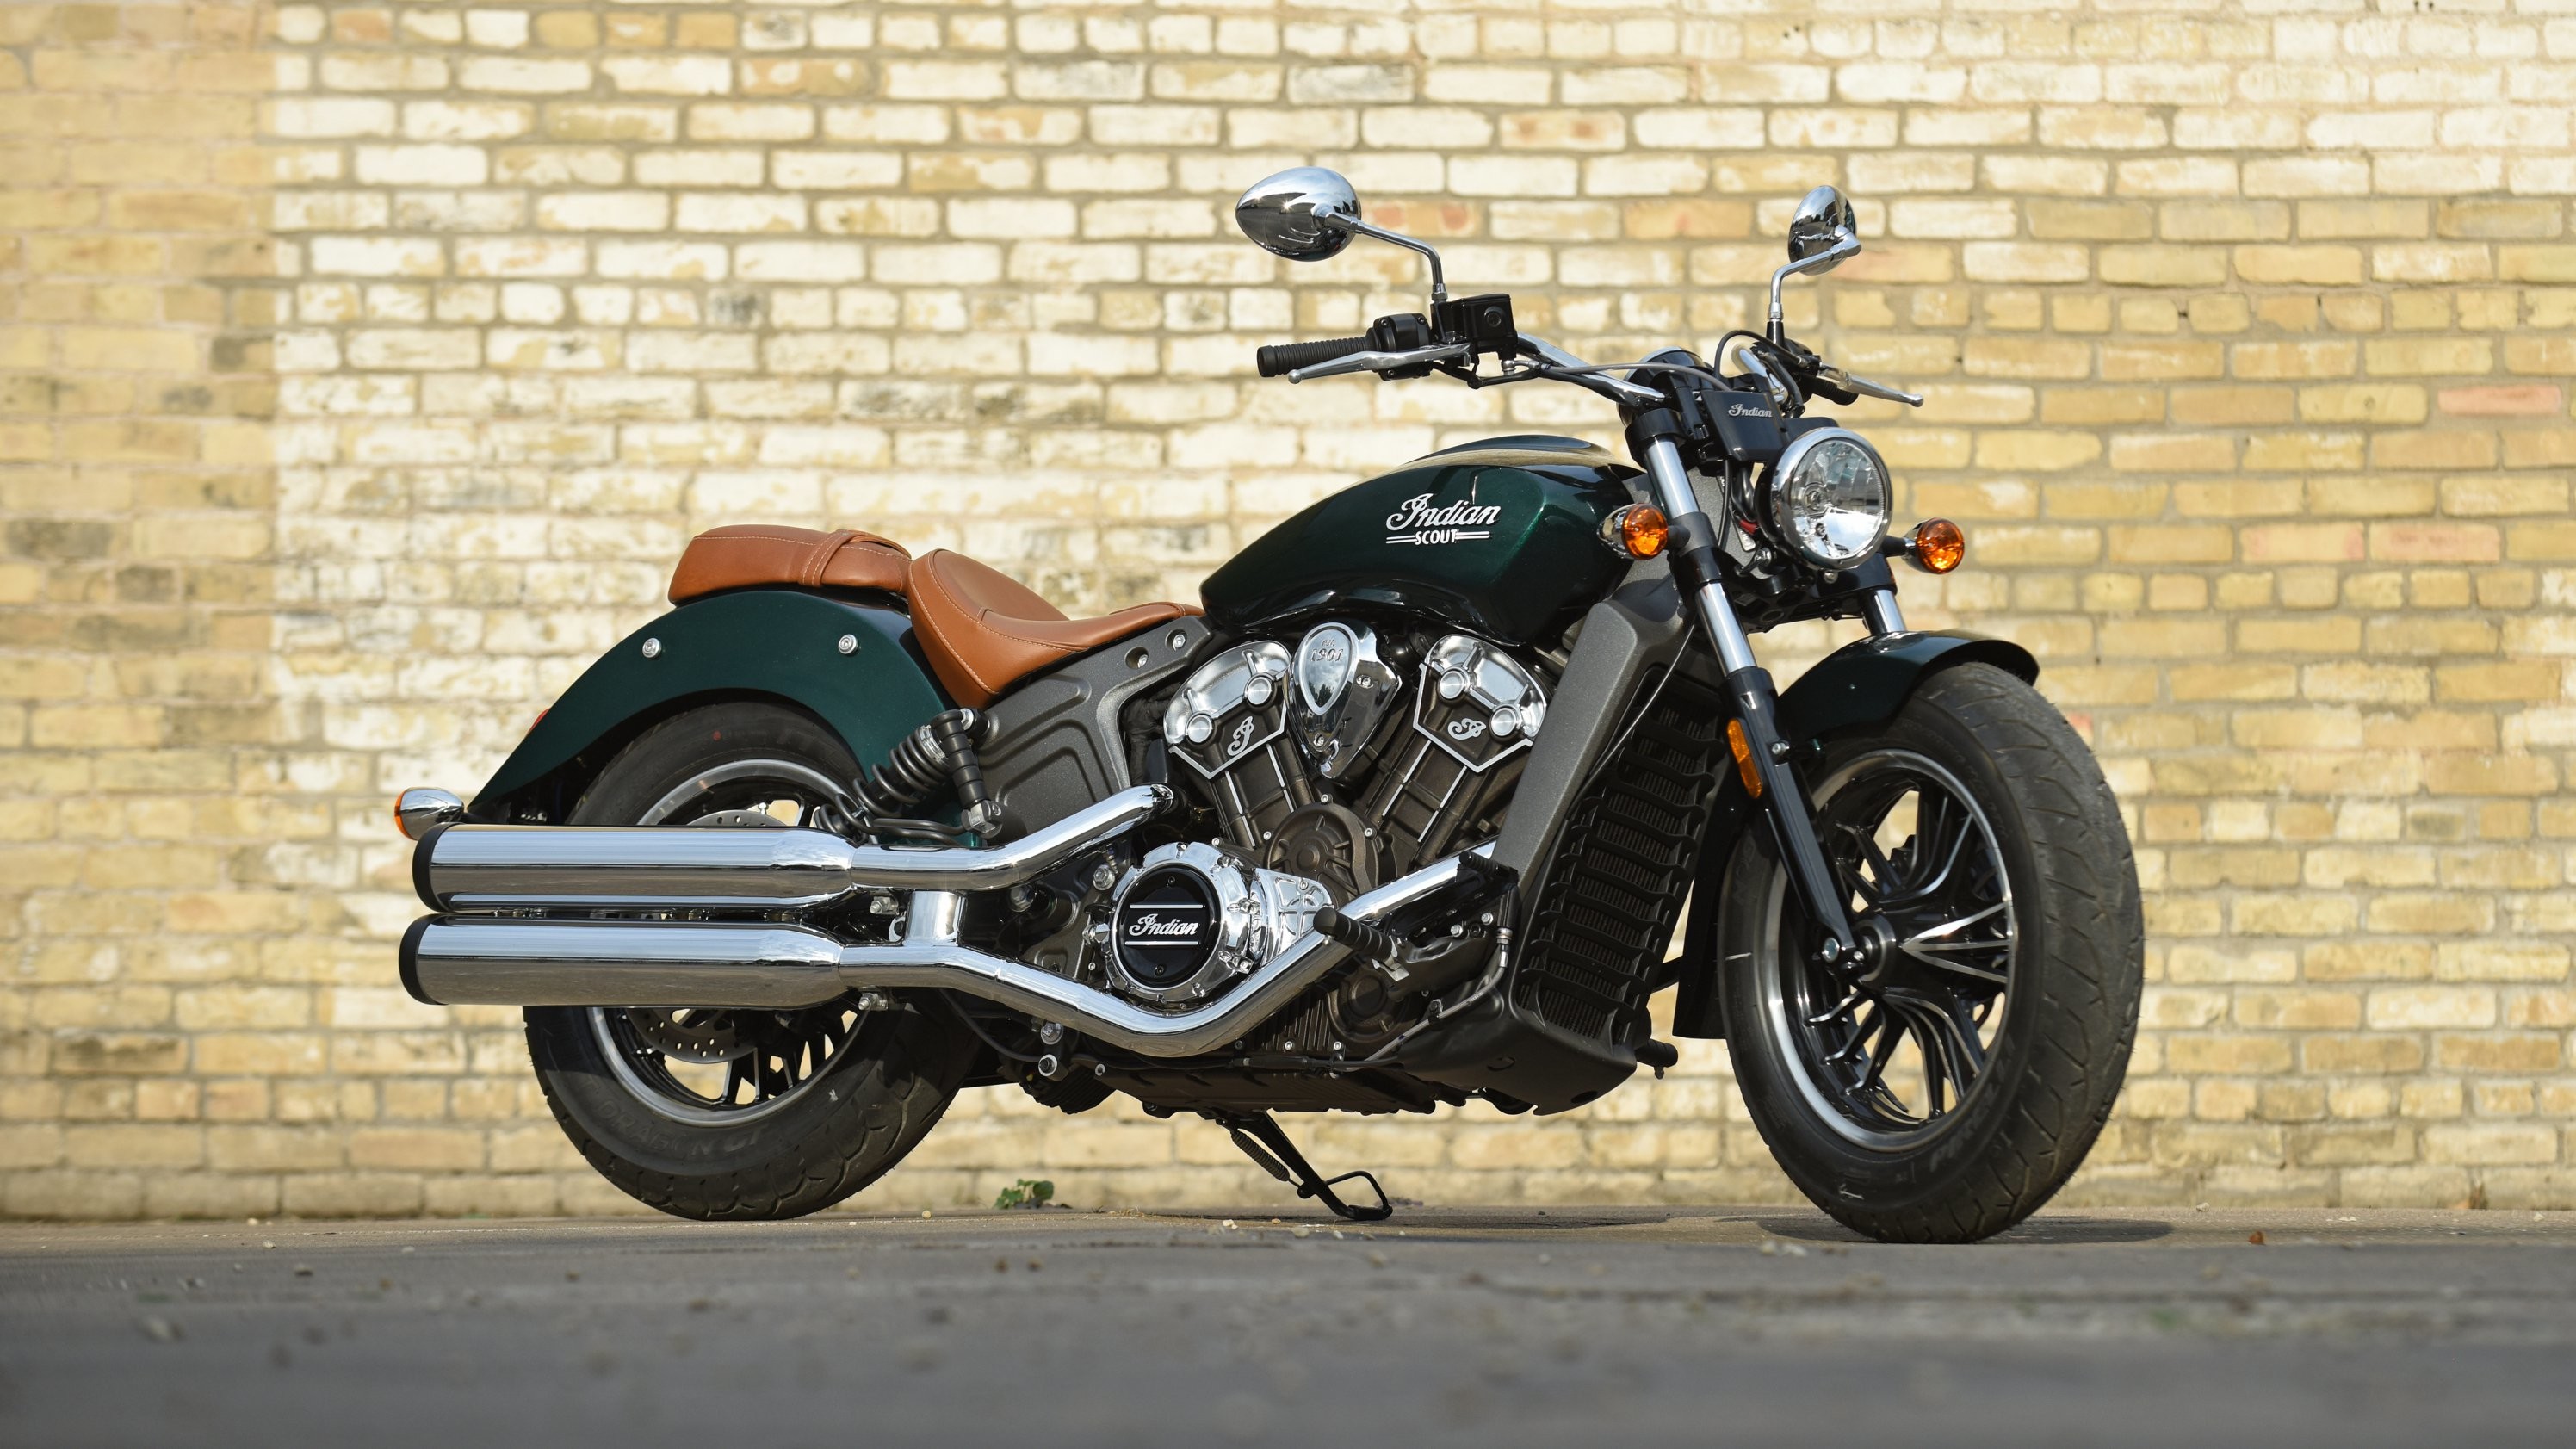 2992x1683 Reintroduced for 2015 after over a decade-long hiatus, the Scout from Indian  Motorcycles has a long and illustrious heritage dating back to 1920.